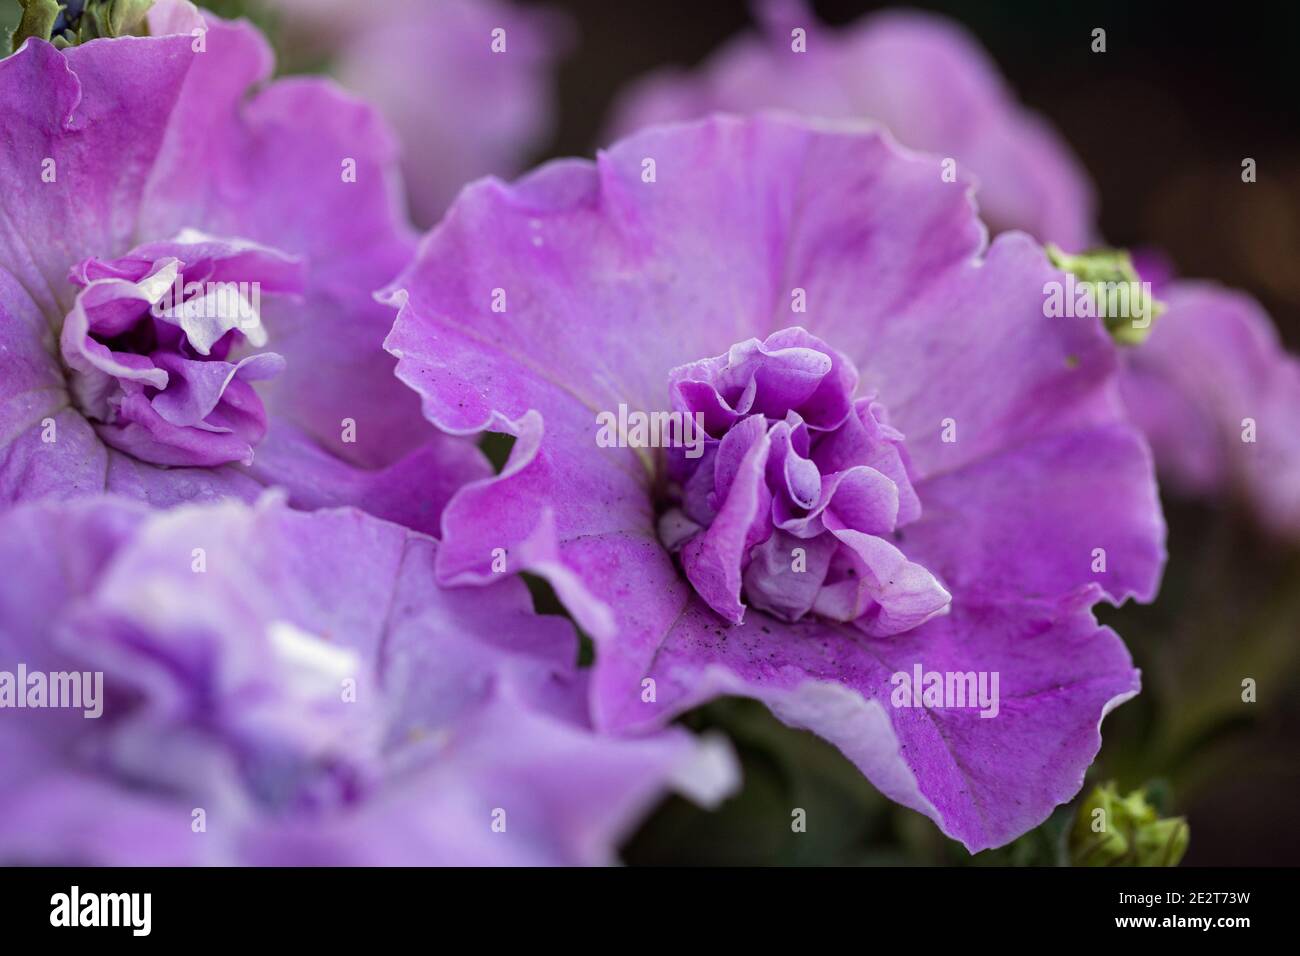 lavender multi-flowered terry petunia flowers close up view. Stock Photo